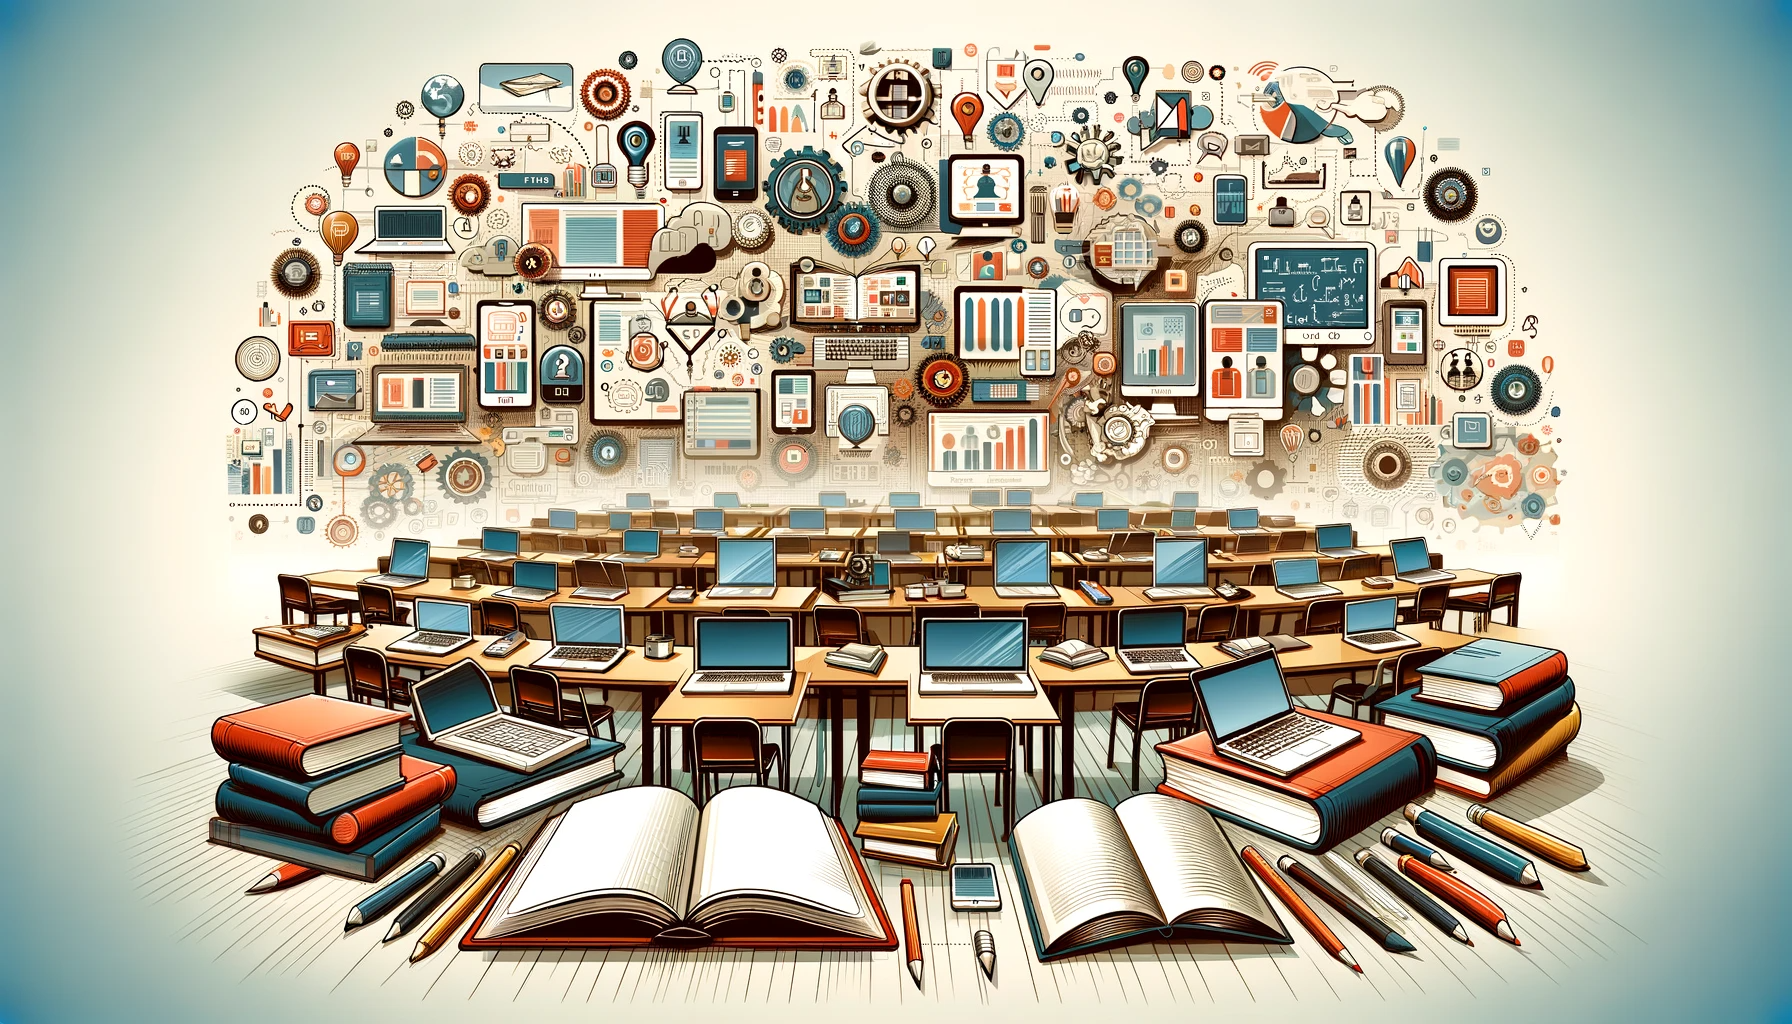 dynamic and stylized classroom filled with open books and laptops on desks, overlaid by a bustling cloud of educational and technological symbols that represent the fusion of traditional learning with digital innovation